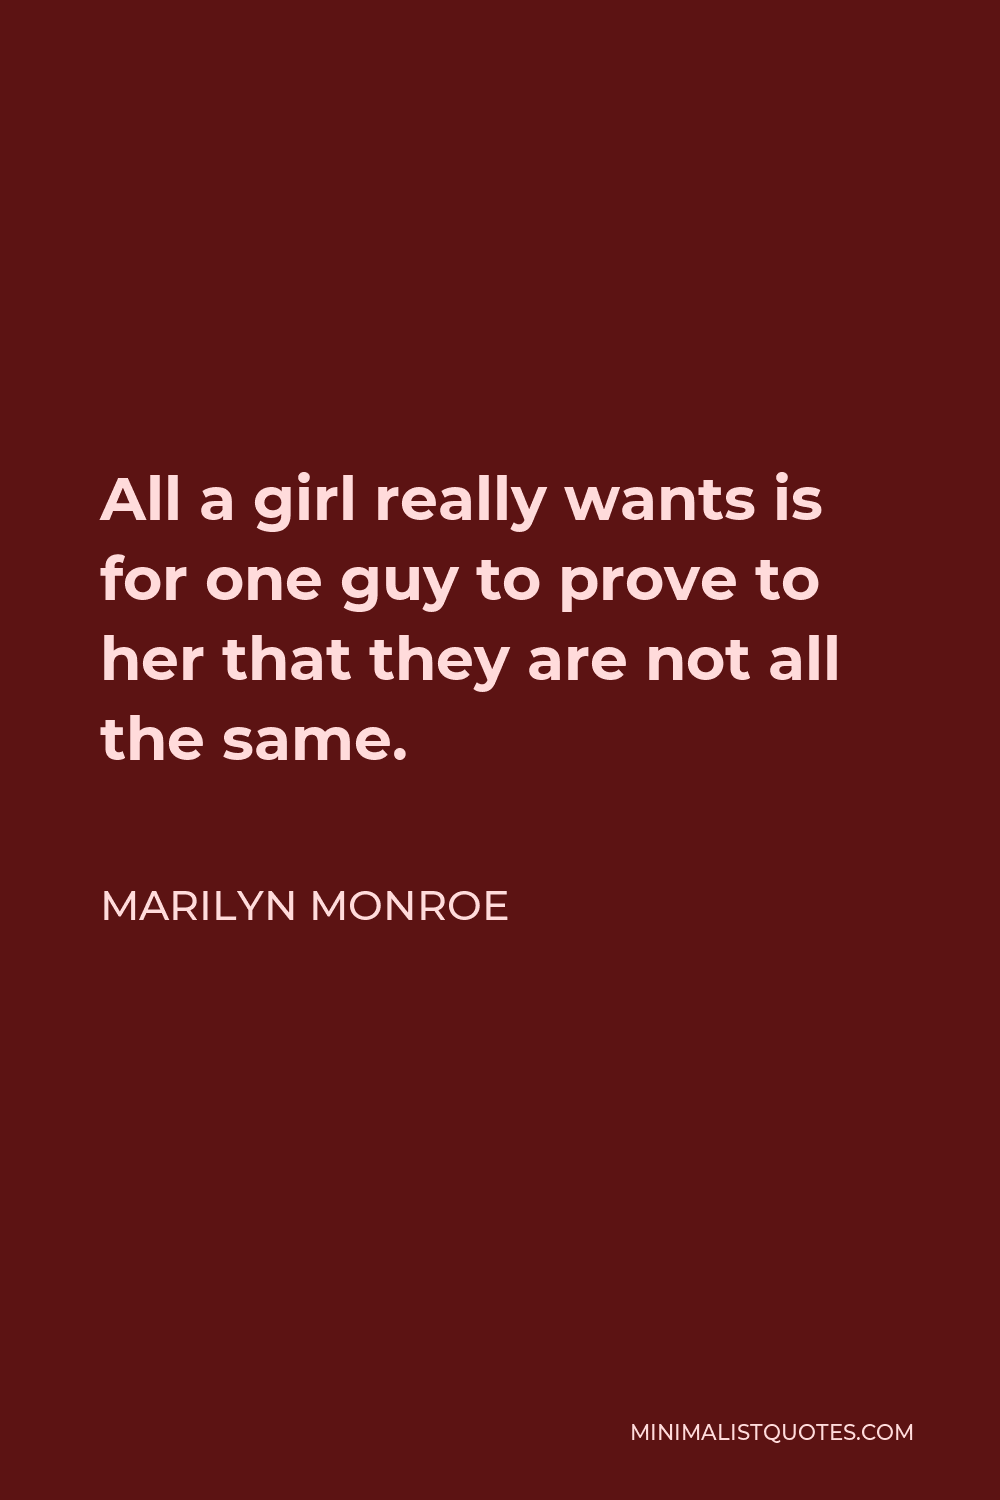 Marilyn Monroe Quote - All a girl really wants is for one guy to prove to her that they are not all the same.